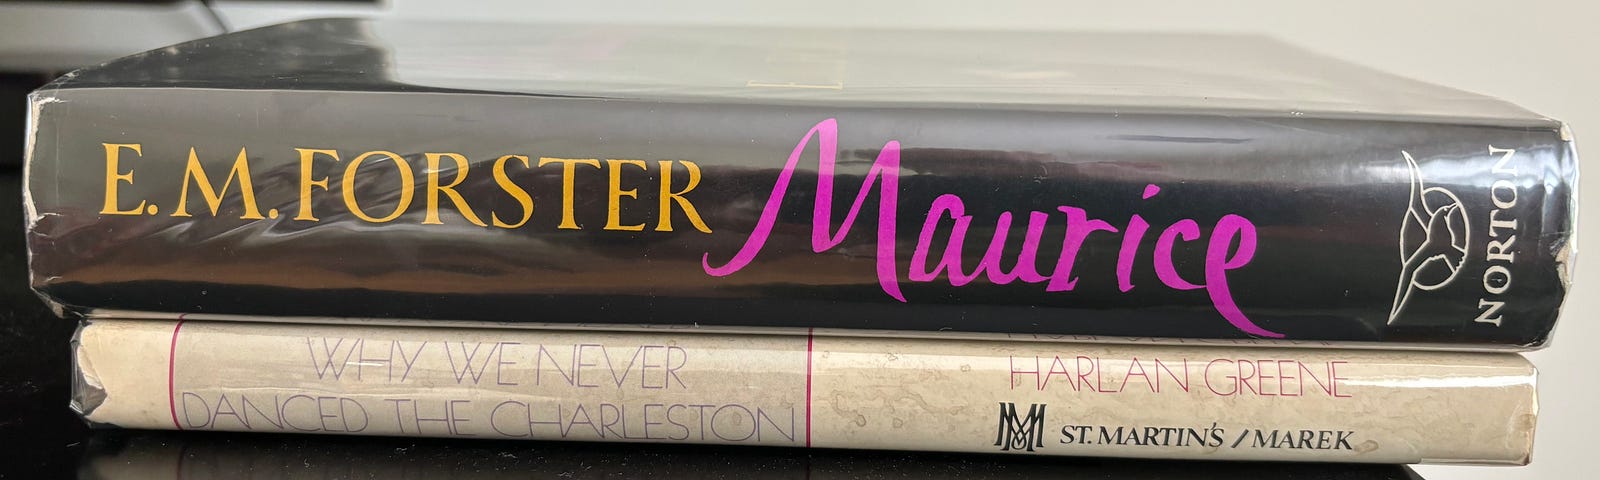 Image shows the spines of two novels: ‘Maurice’ by E. M. Forster, and ‘Why We Never Danced the Charleston’ by Harlan Greene.